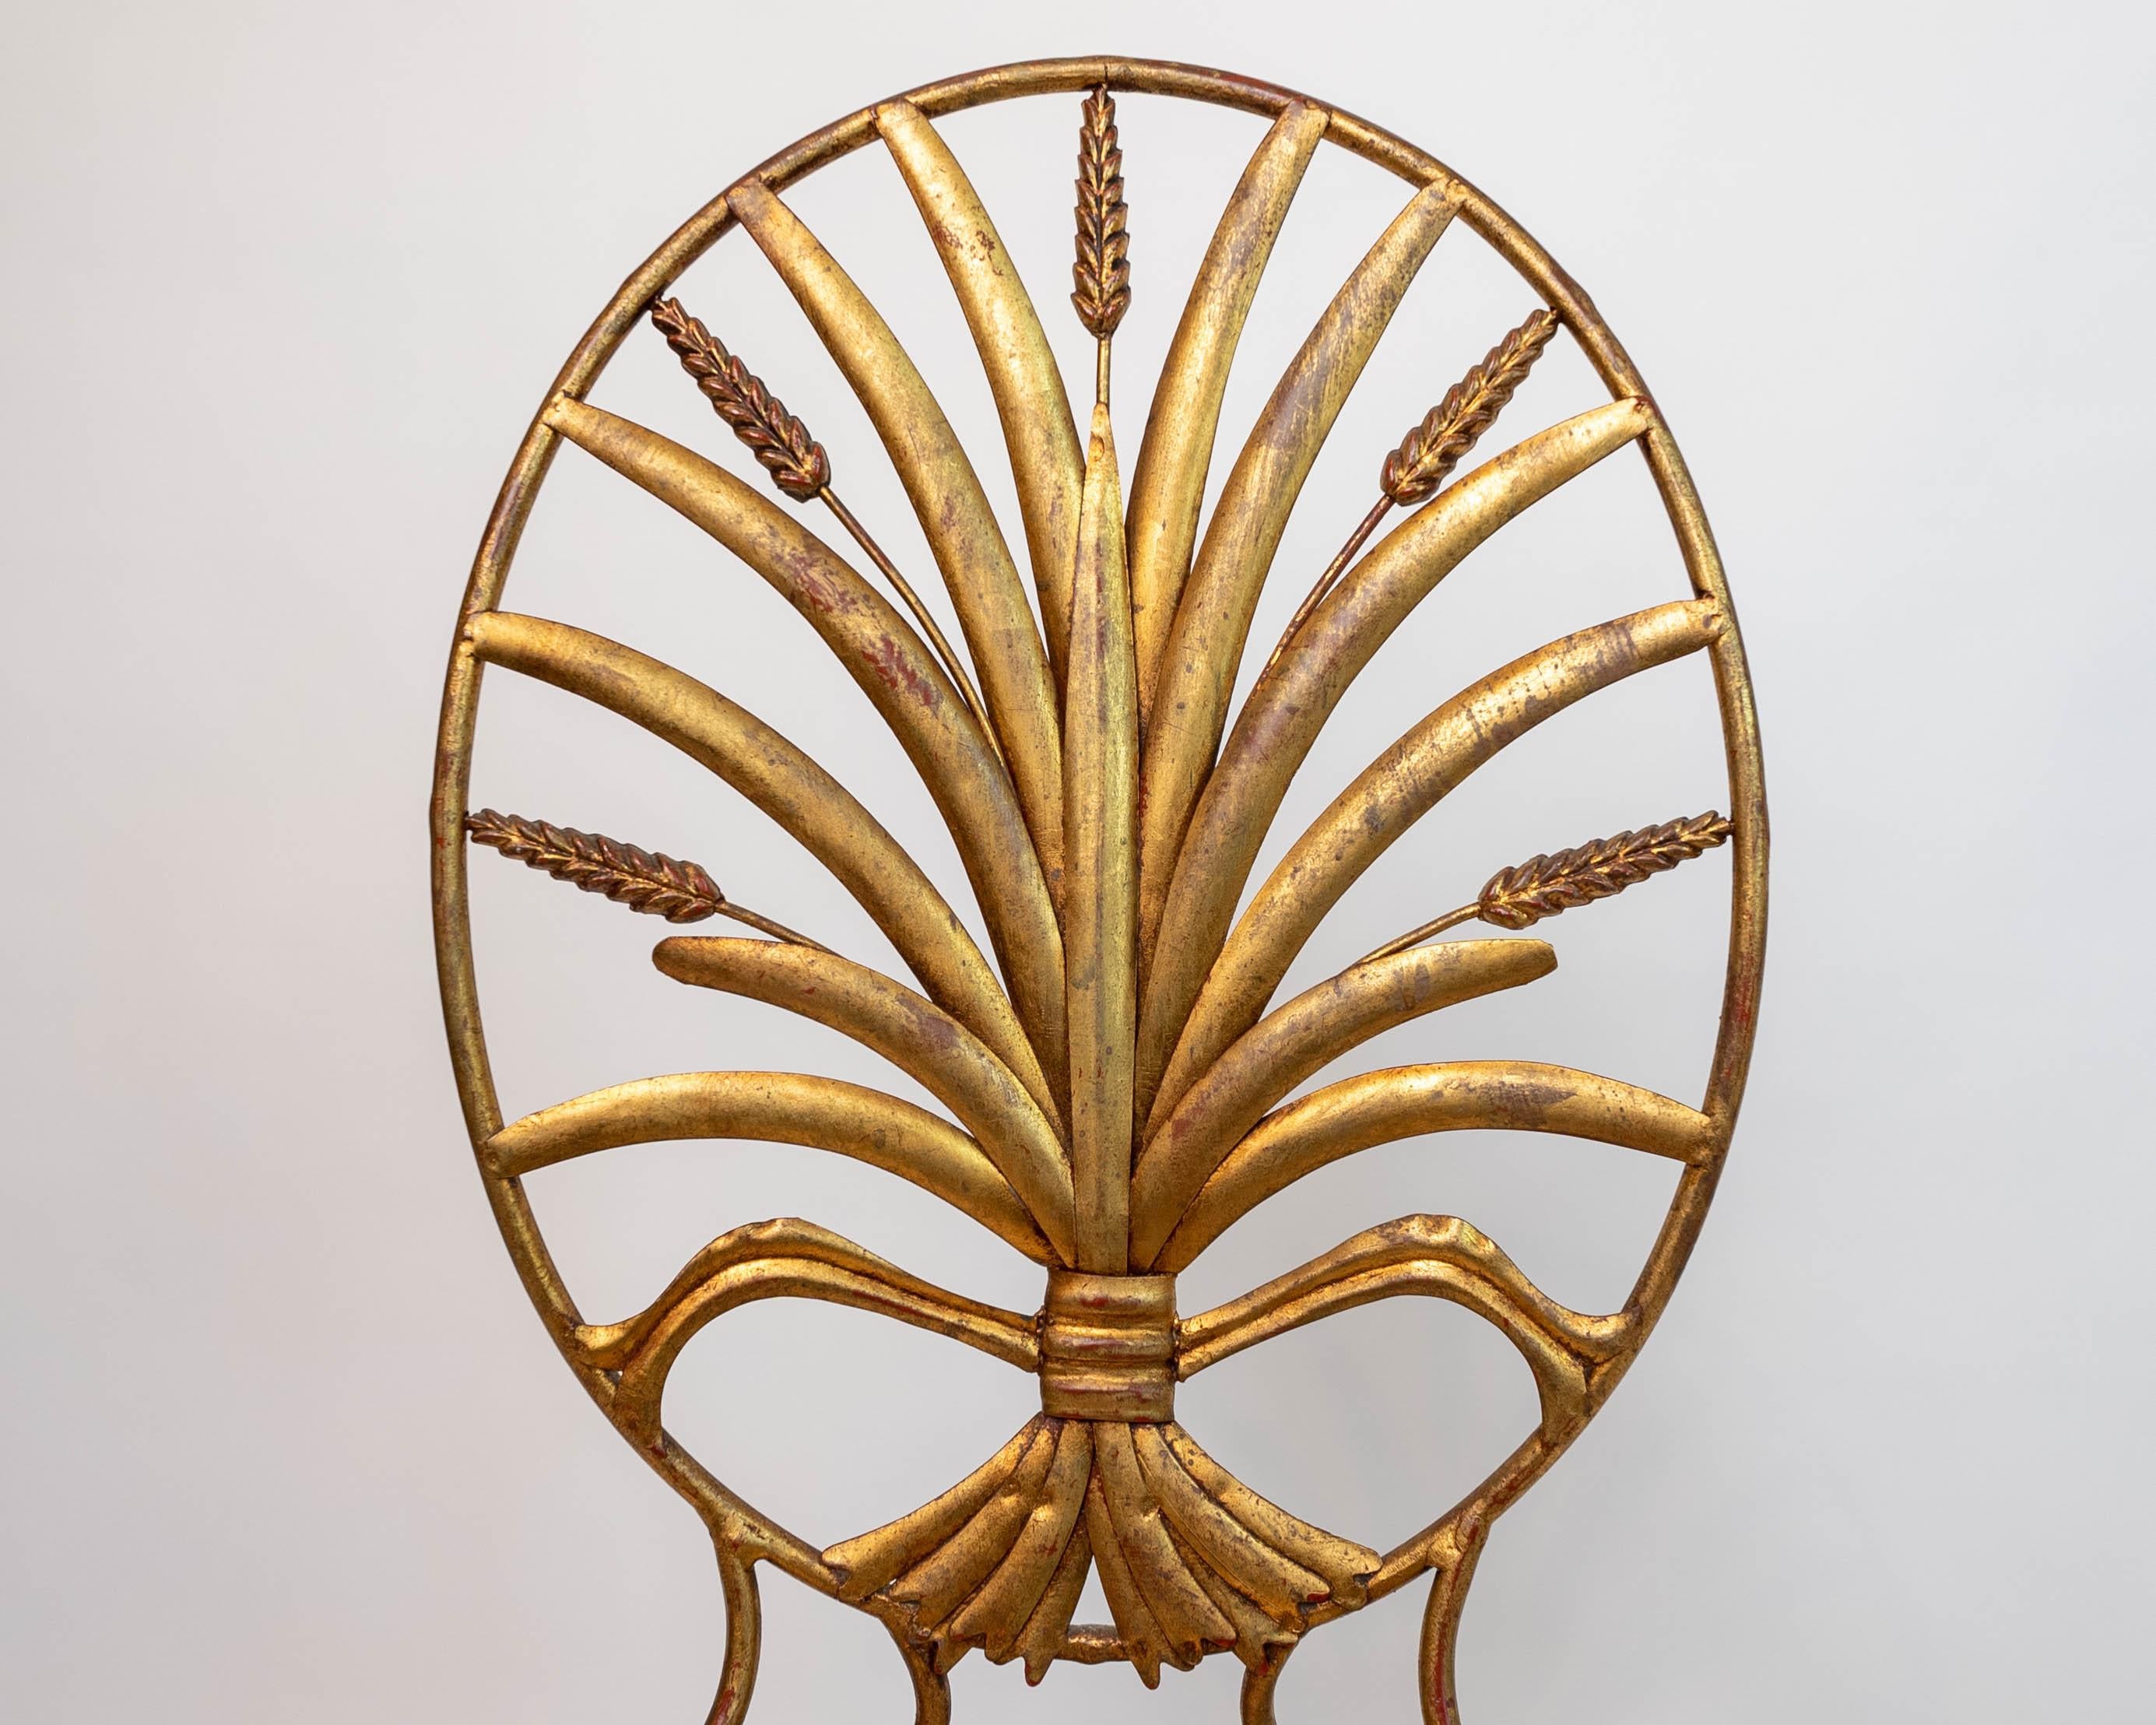 Glam pair of Italian vintage wheat sheaf motif side chairs by S. Salvadori having elegant gilded metal detailed oval backs with fanned display of stalks of wheat, slender legs and x stretchers.